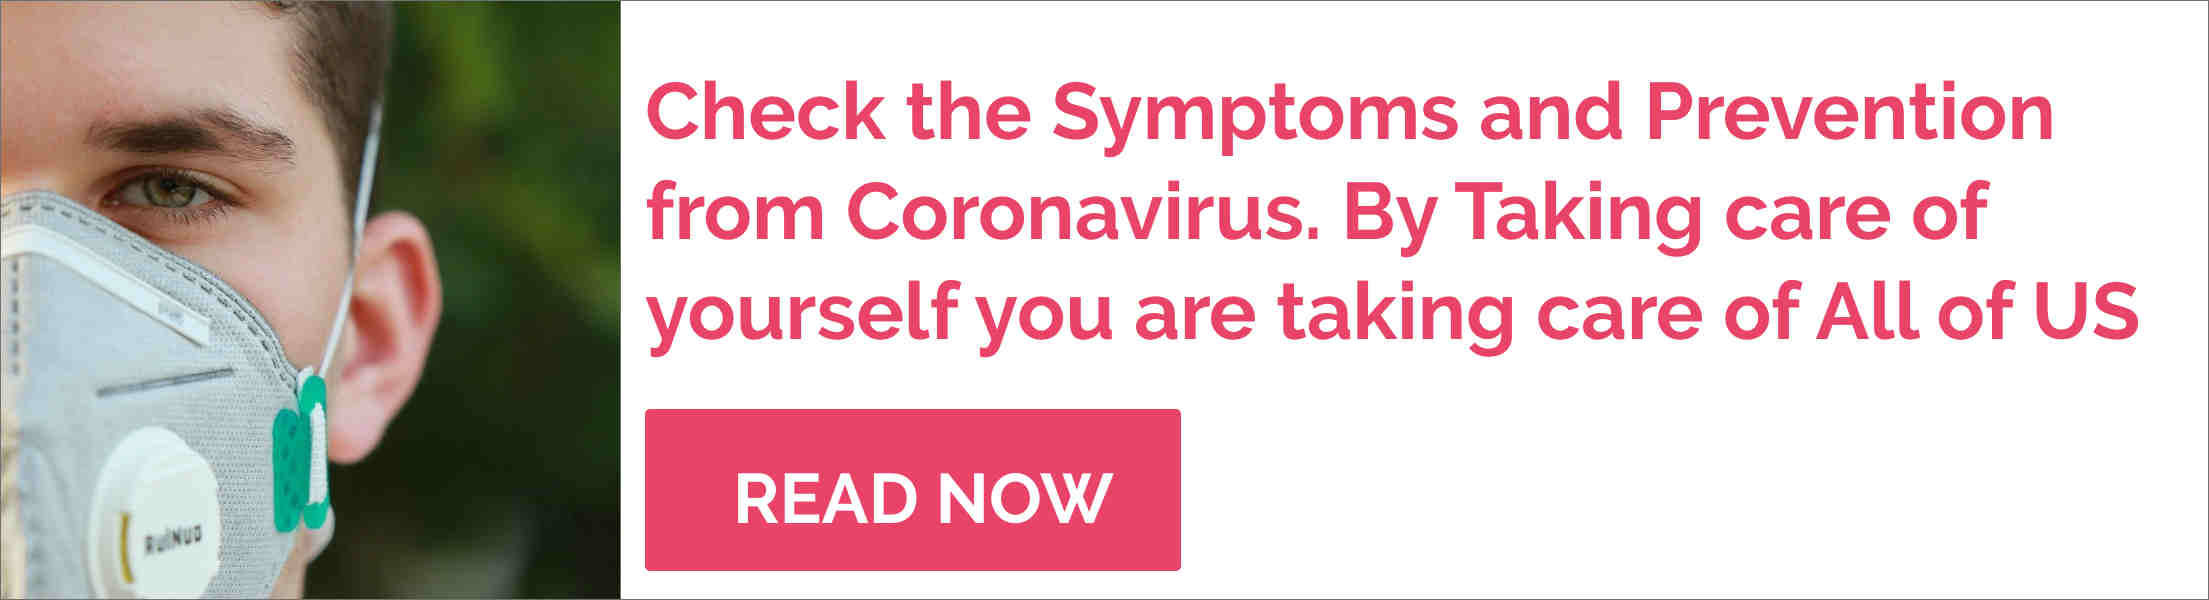 Symptoms and Prevention from Coronavirus